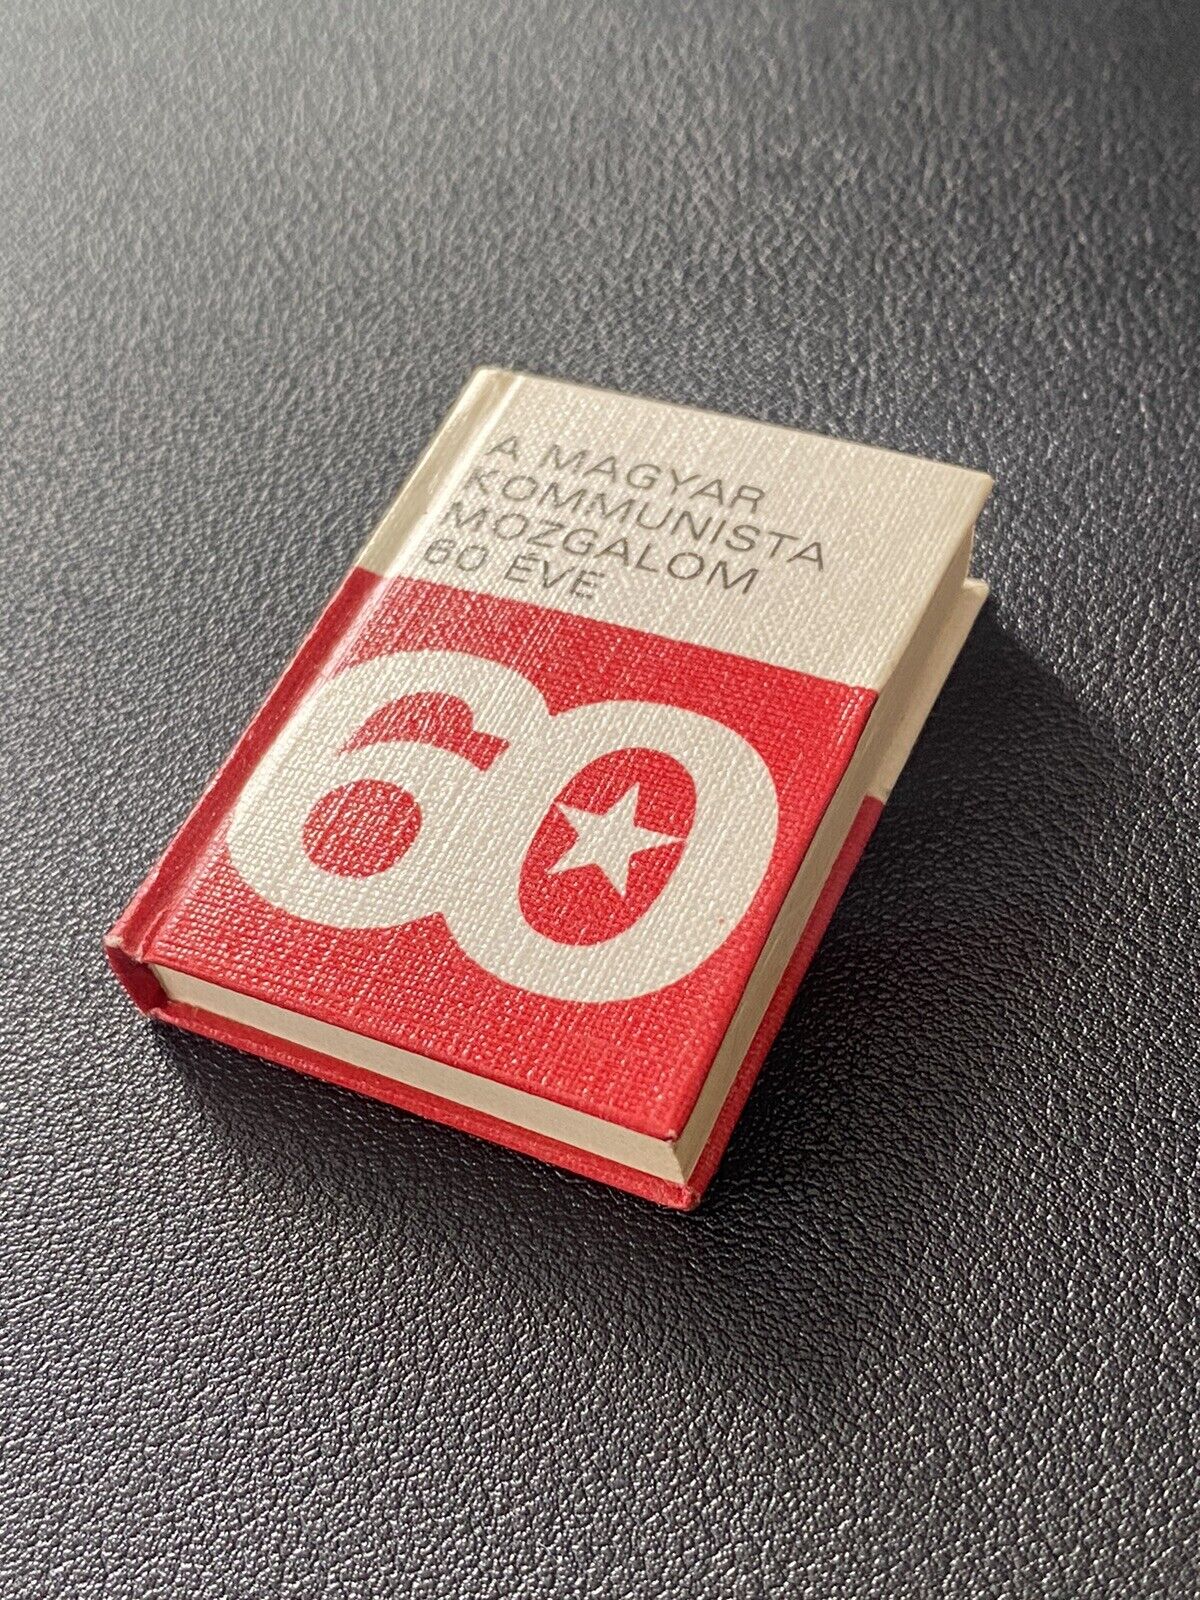 Very Rare Vintage Micro Book  60 Years Of The Communist Movement In Hungary №366